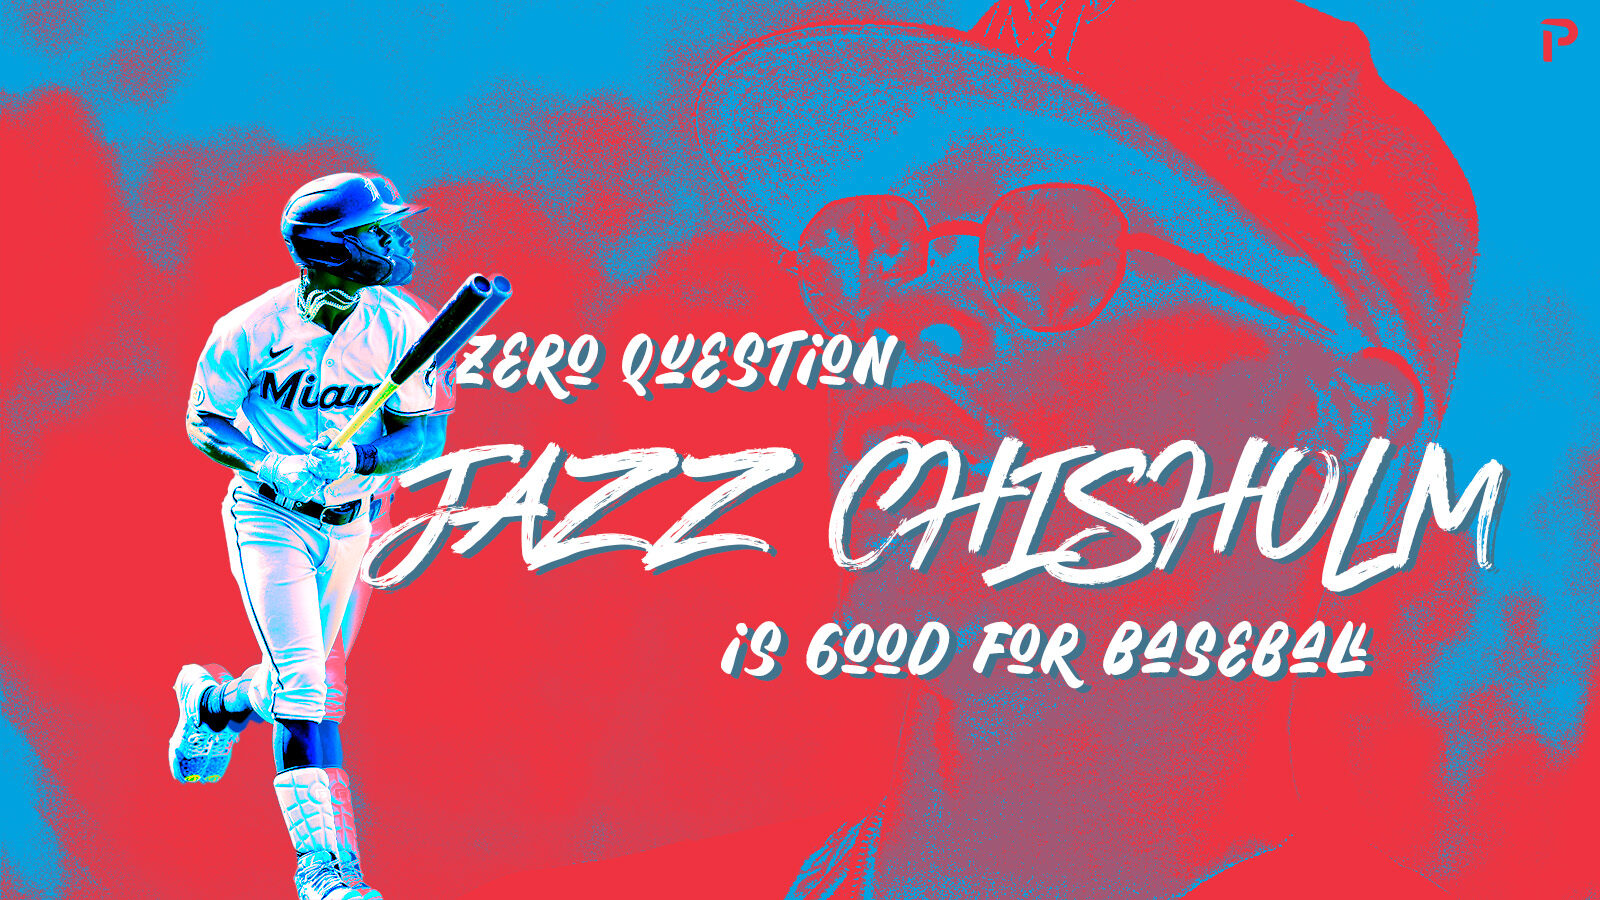 Zero Question Jazz Chisholm is Good for Baseball